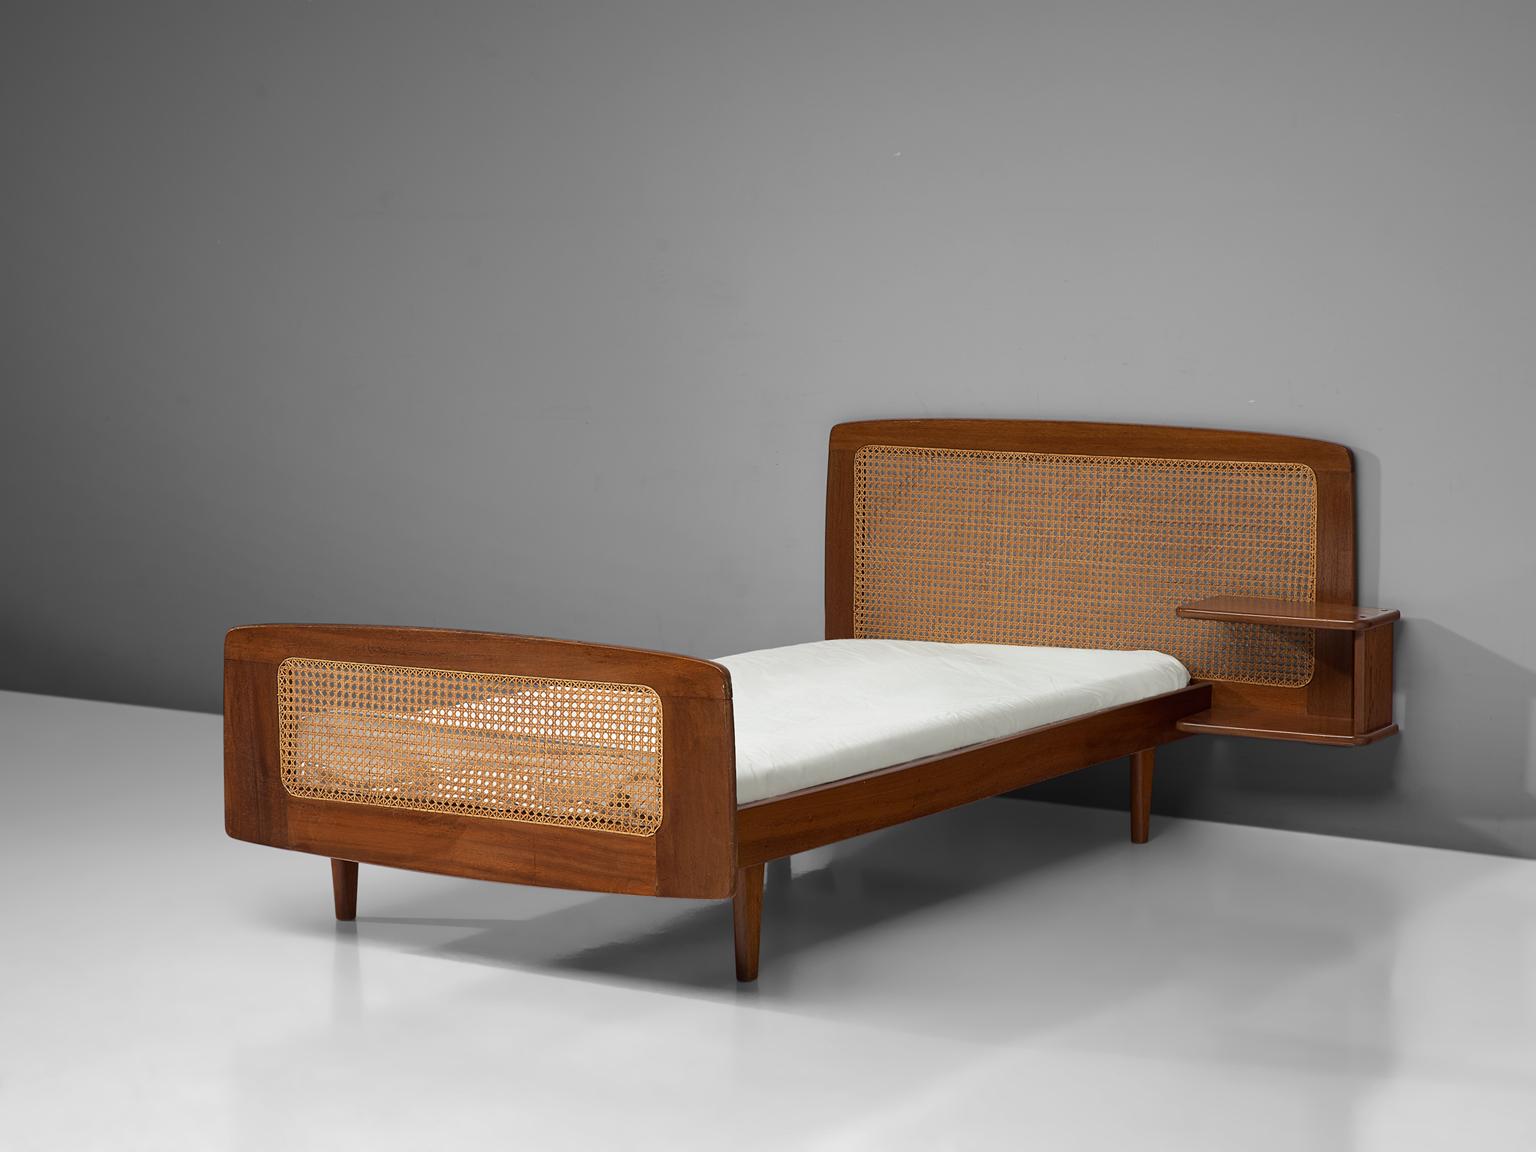 Roger Landault, single bed, mahogany and cane, France, 1950s

French Post-War Reconstruction single bed designed by Roger Landault. The bed is made of mahogany and features a headboard and footboard made with cane. Shelves are attached to the